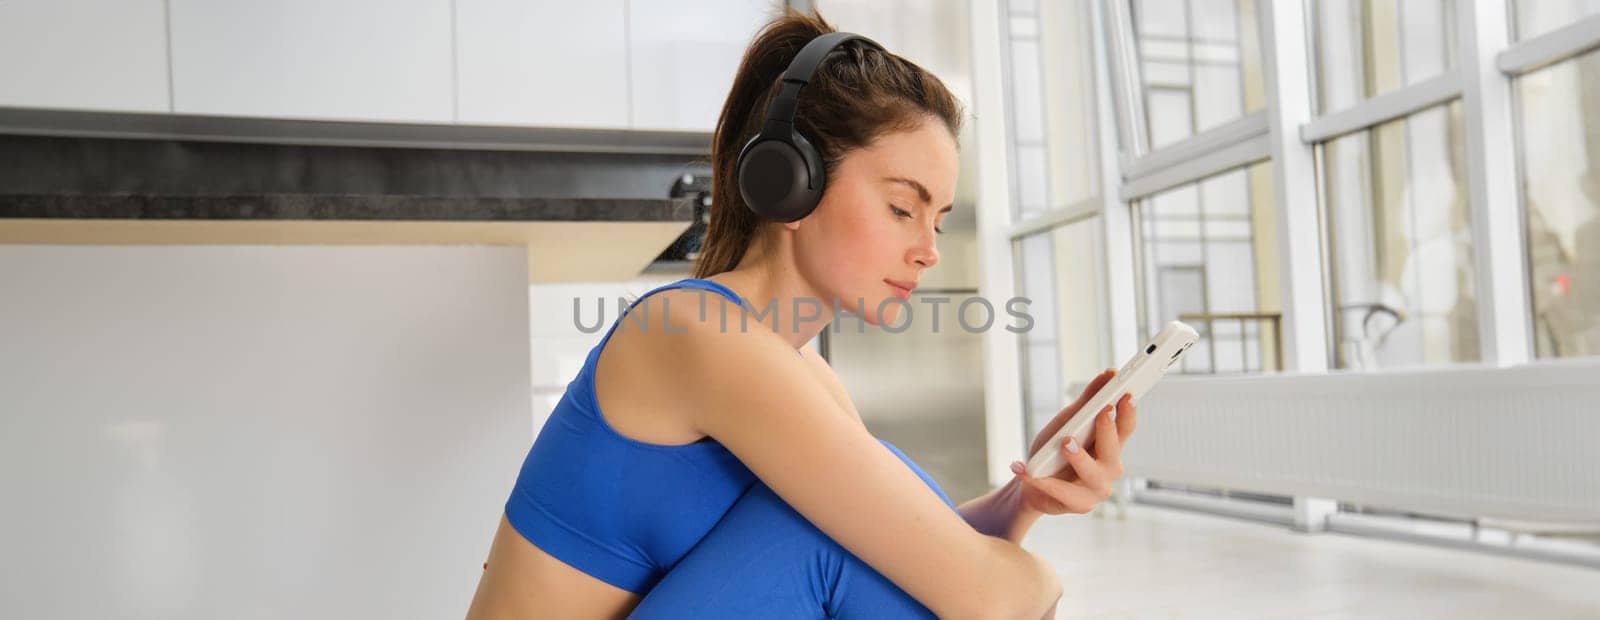 Fitness and wellbeing. Portrait of young woman doing fitness exercises, workout from home, wearing headphones and using smartphone, exercising indoors.